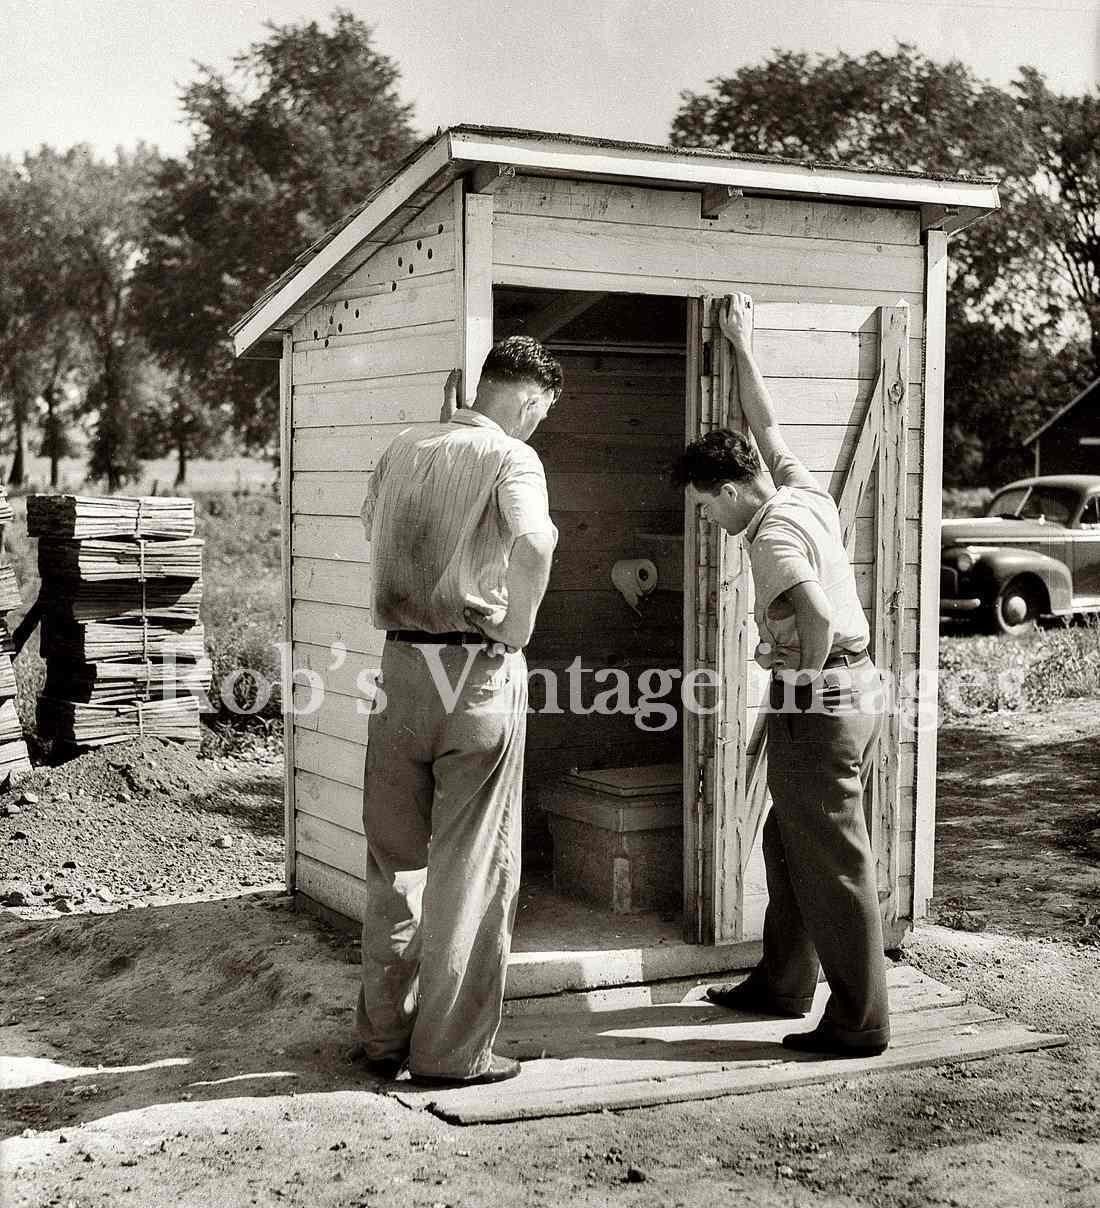 Outhouse One Holer, Vintage 1930s New Deal Rural Great Depression Bathroom